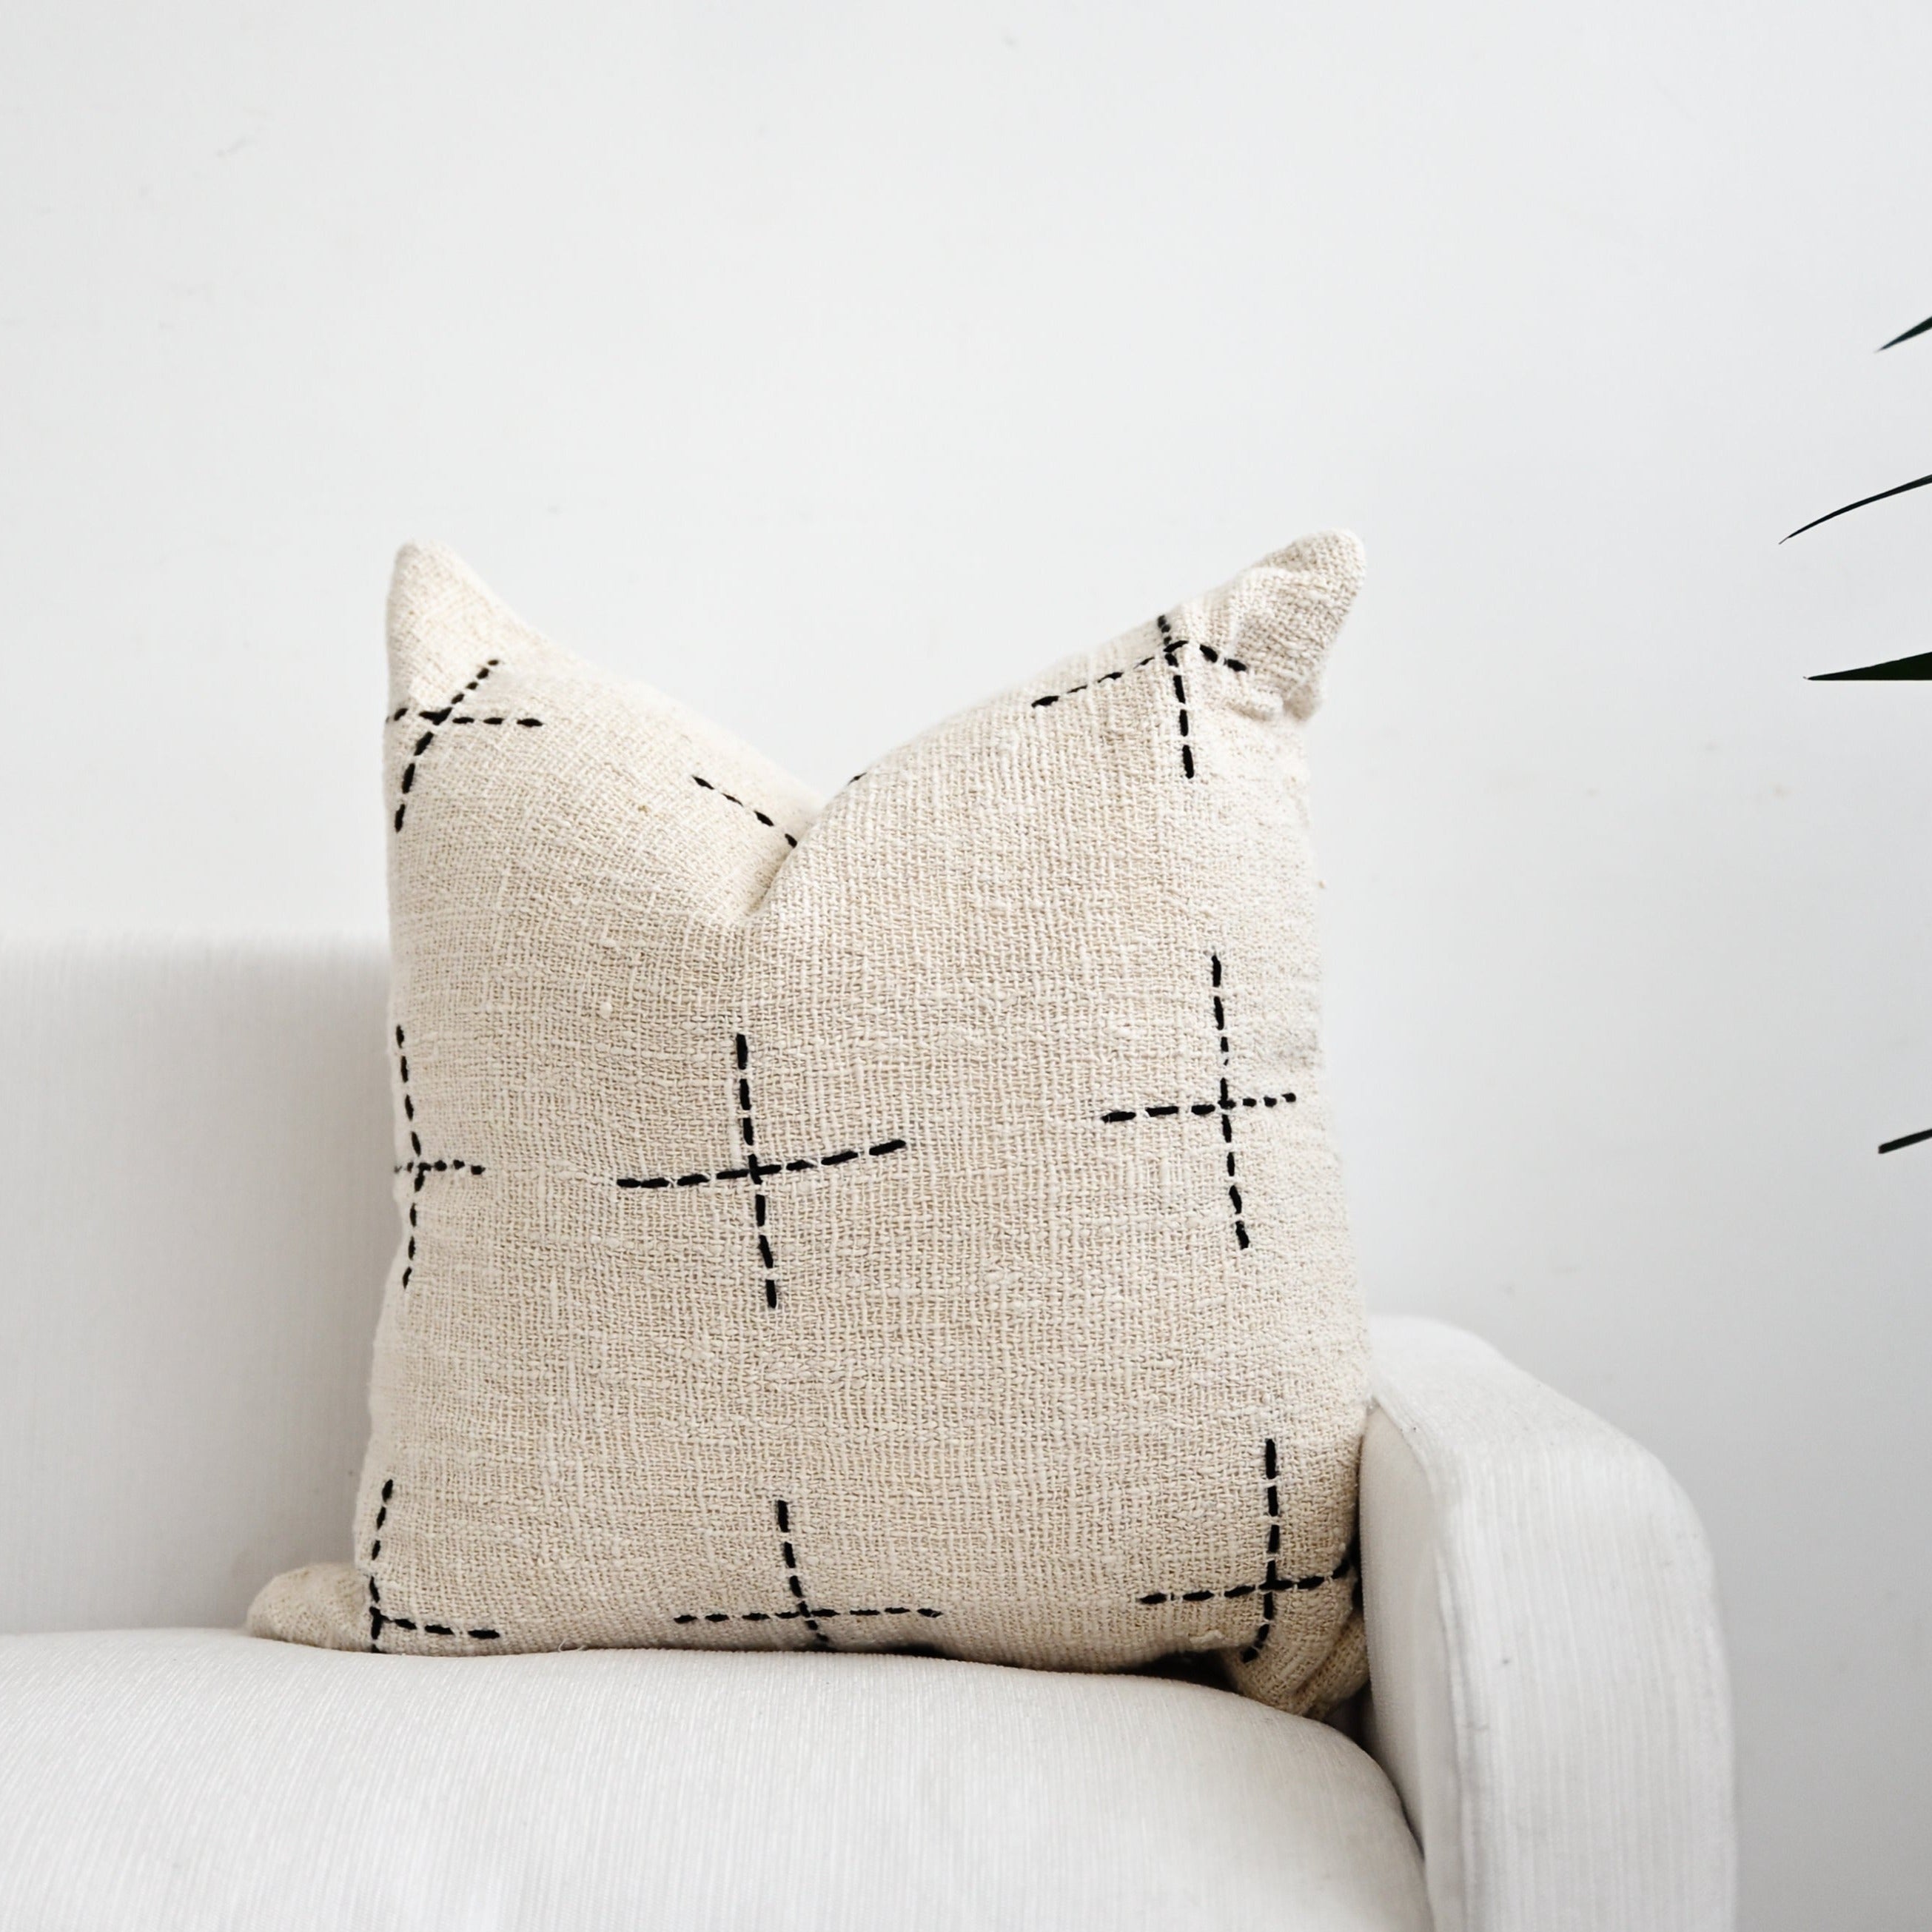 Lalabella Cushion with Stitched Cross